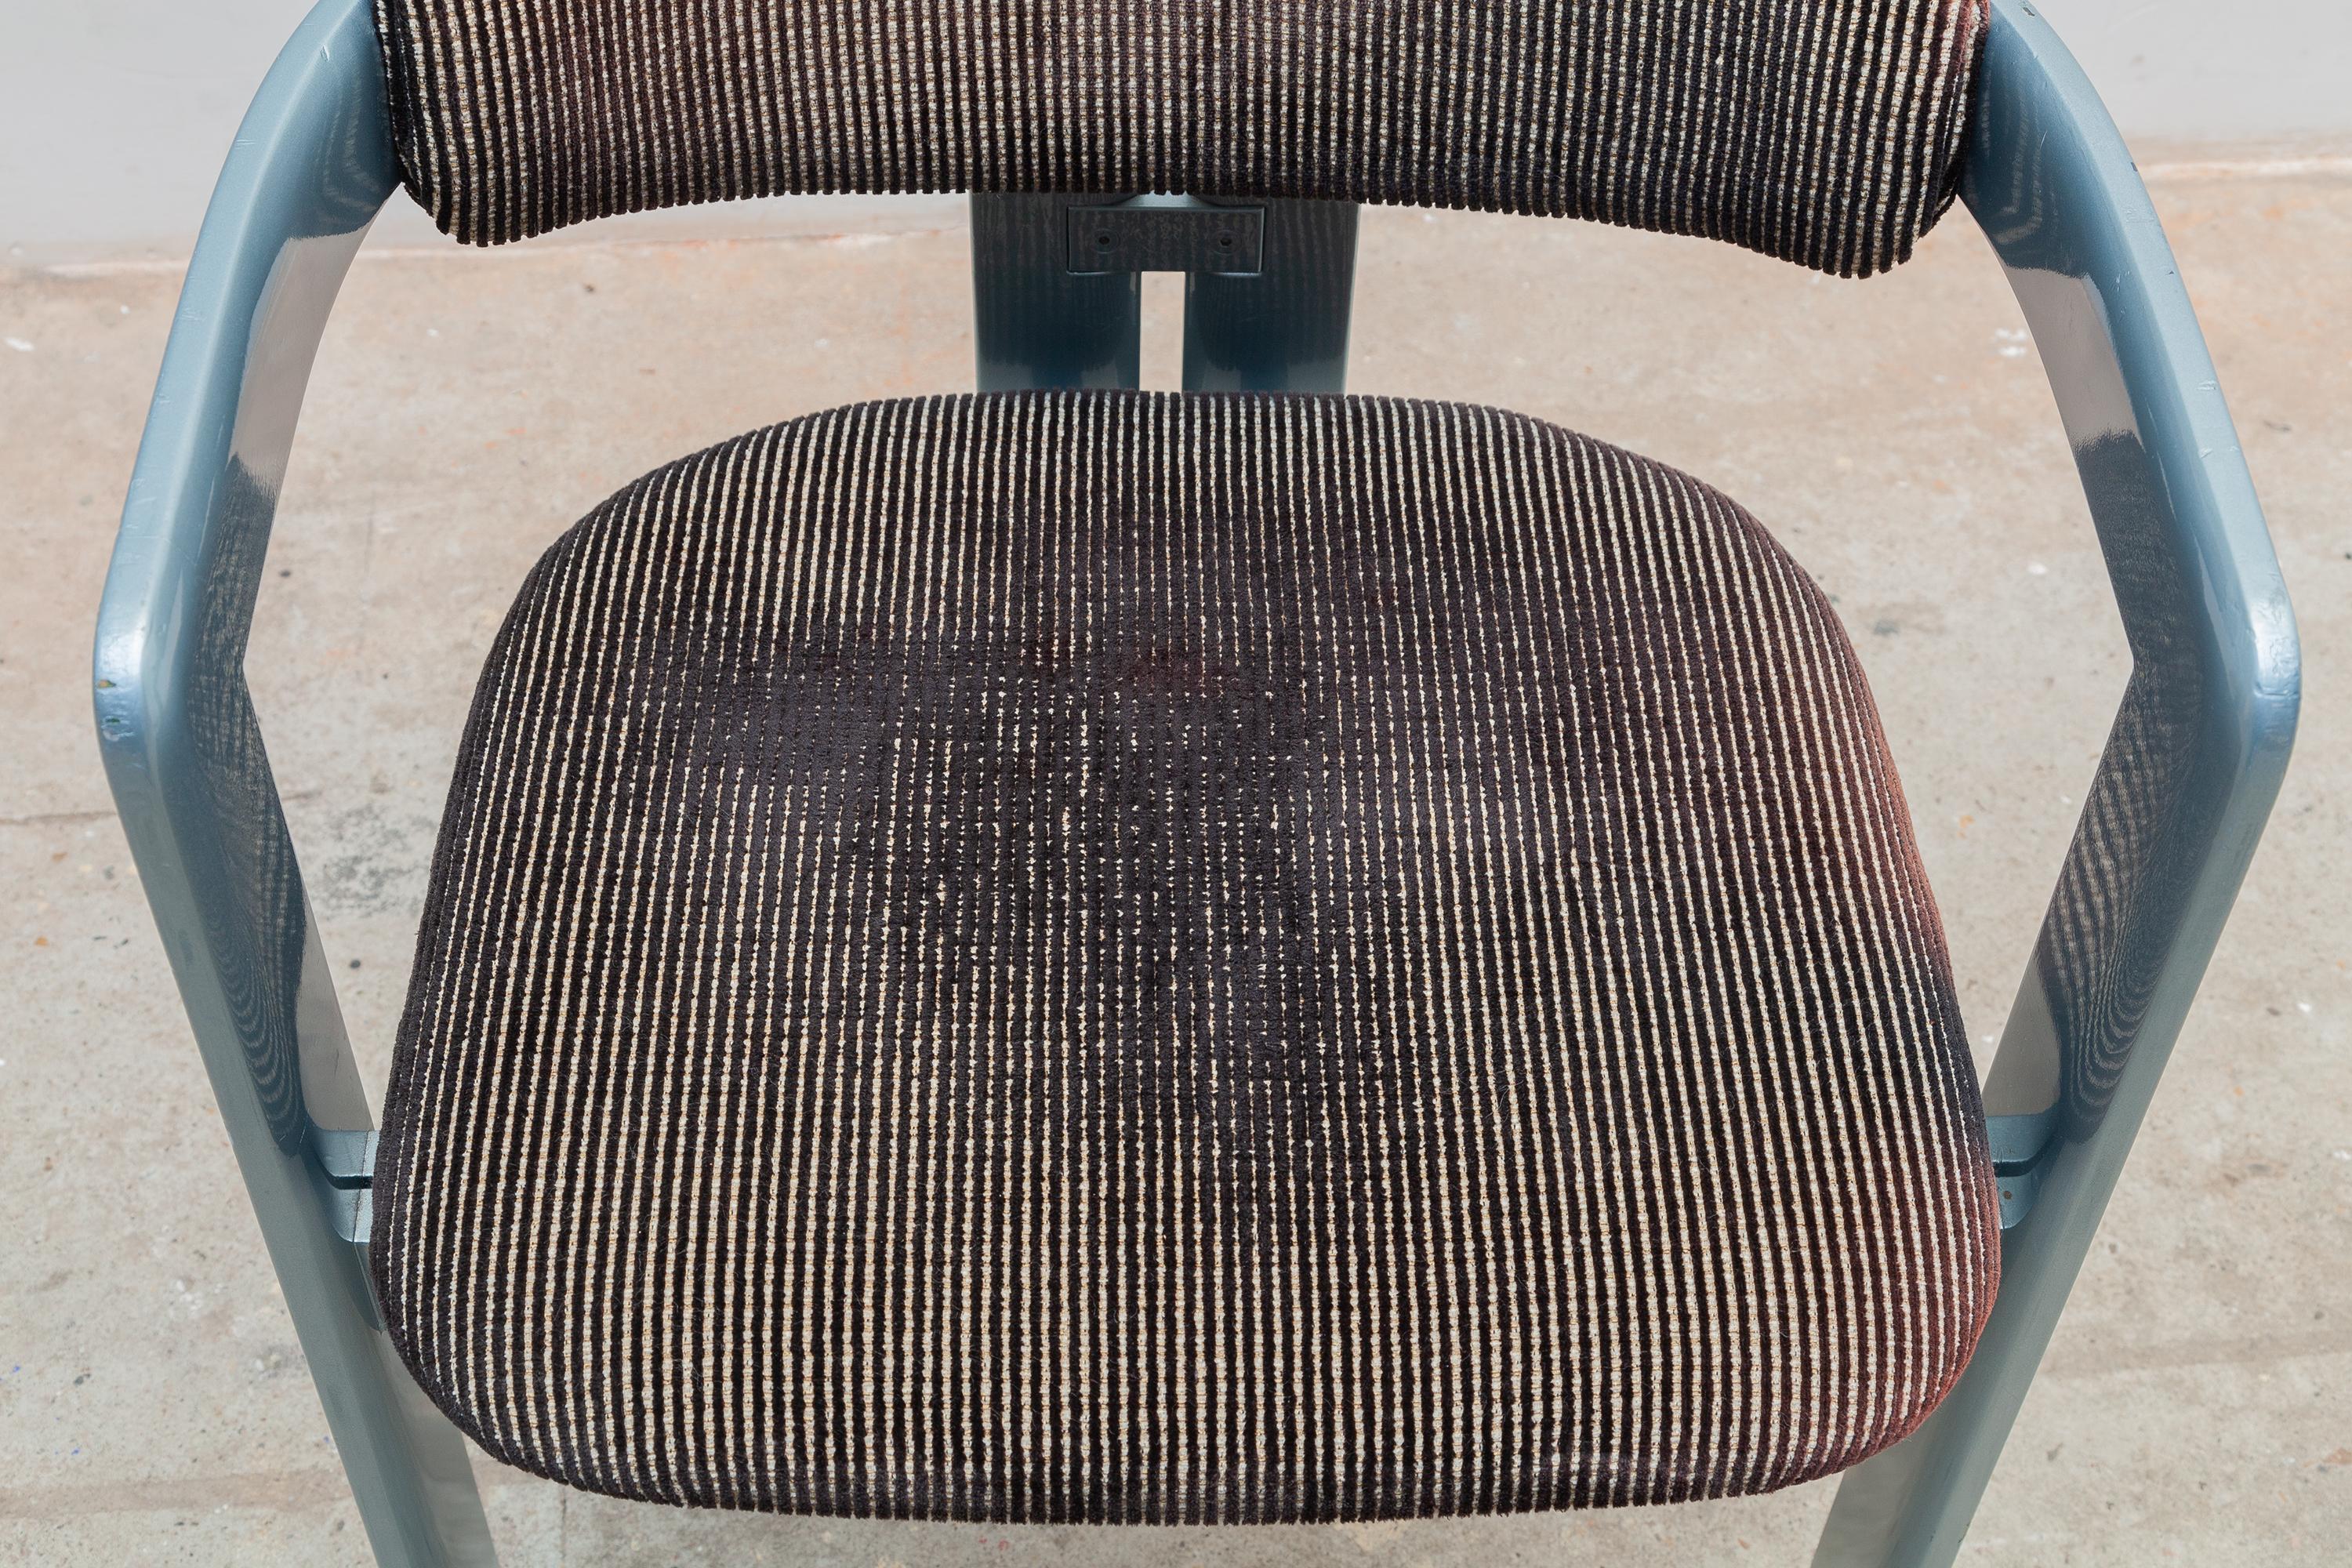 Upholstery Augusto Savini 'Pamplona' Mid-Century Modern Set of 4 Armchairs 1970s for Pozzi For Sale